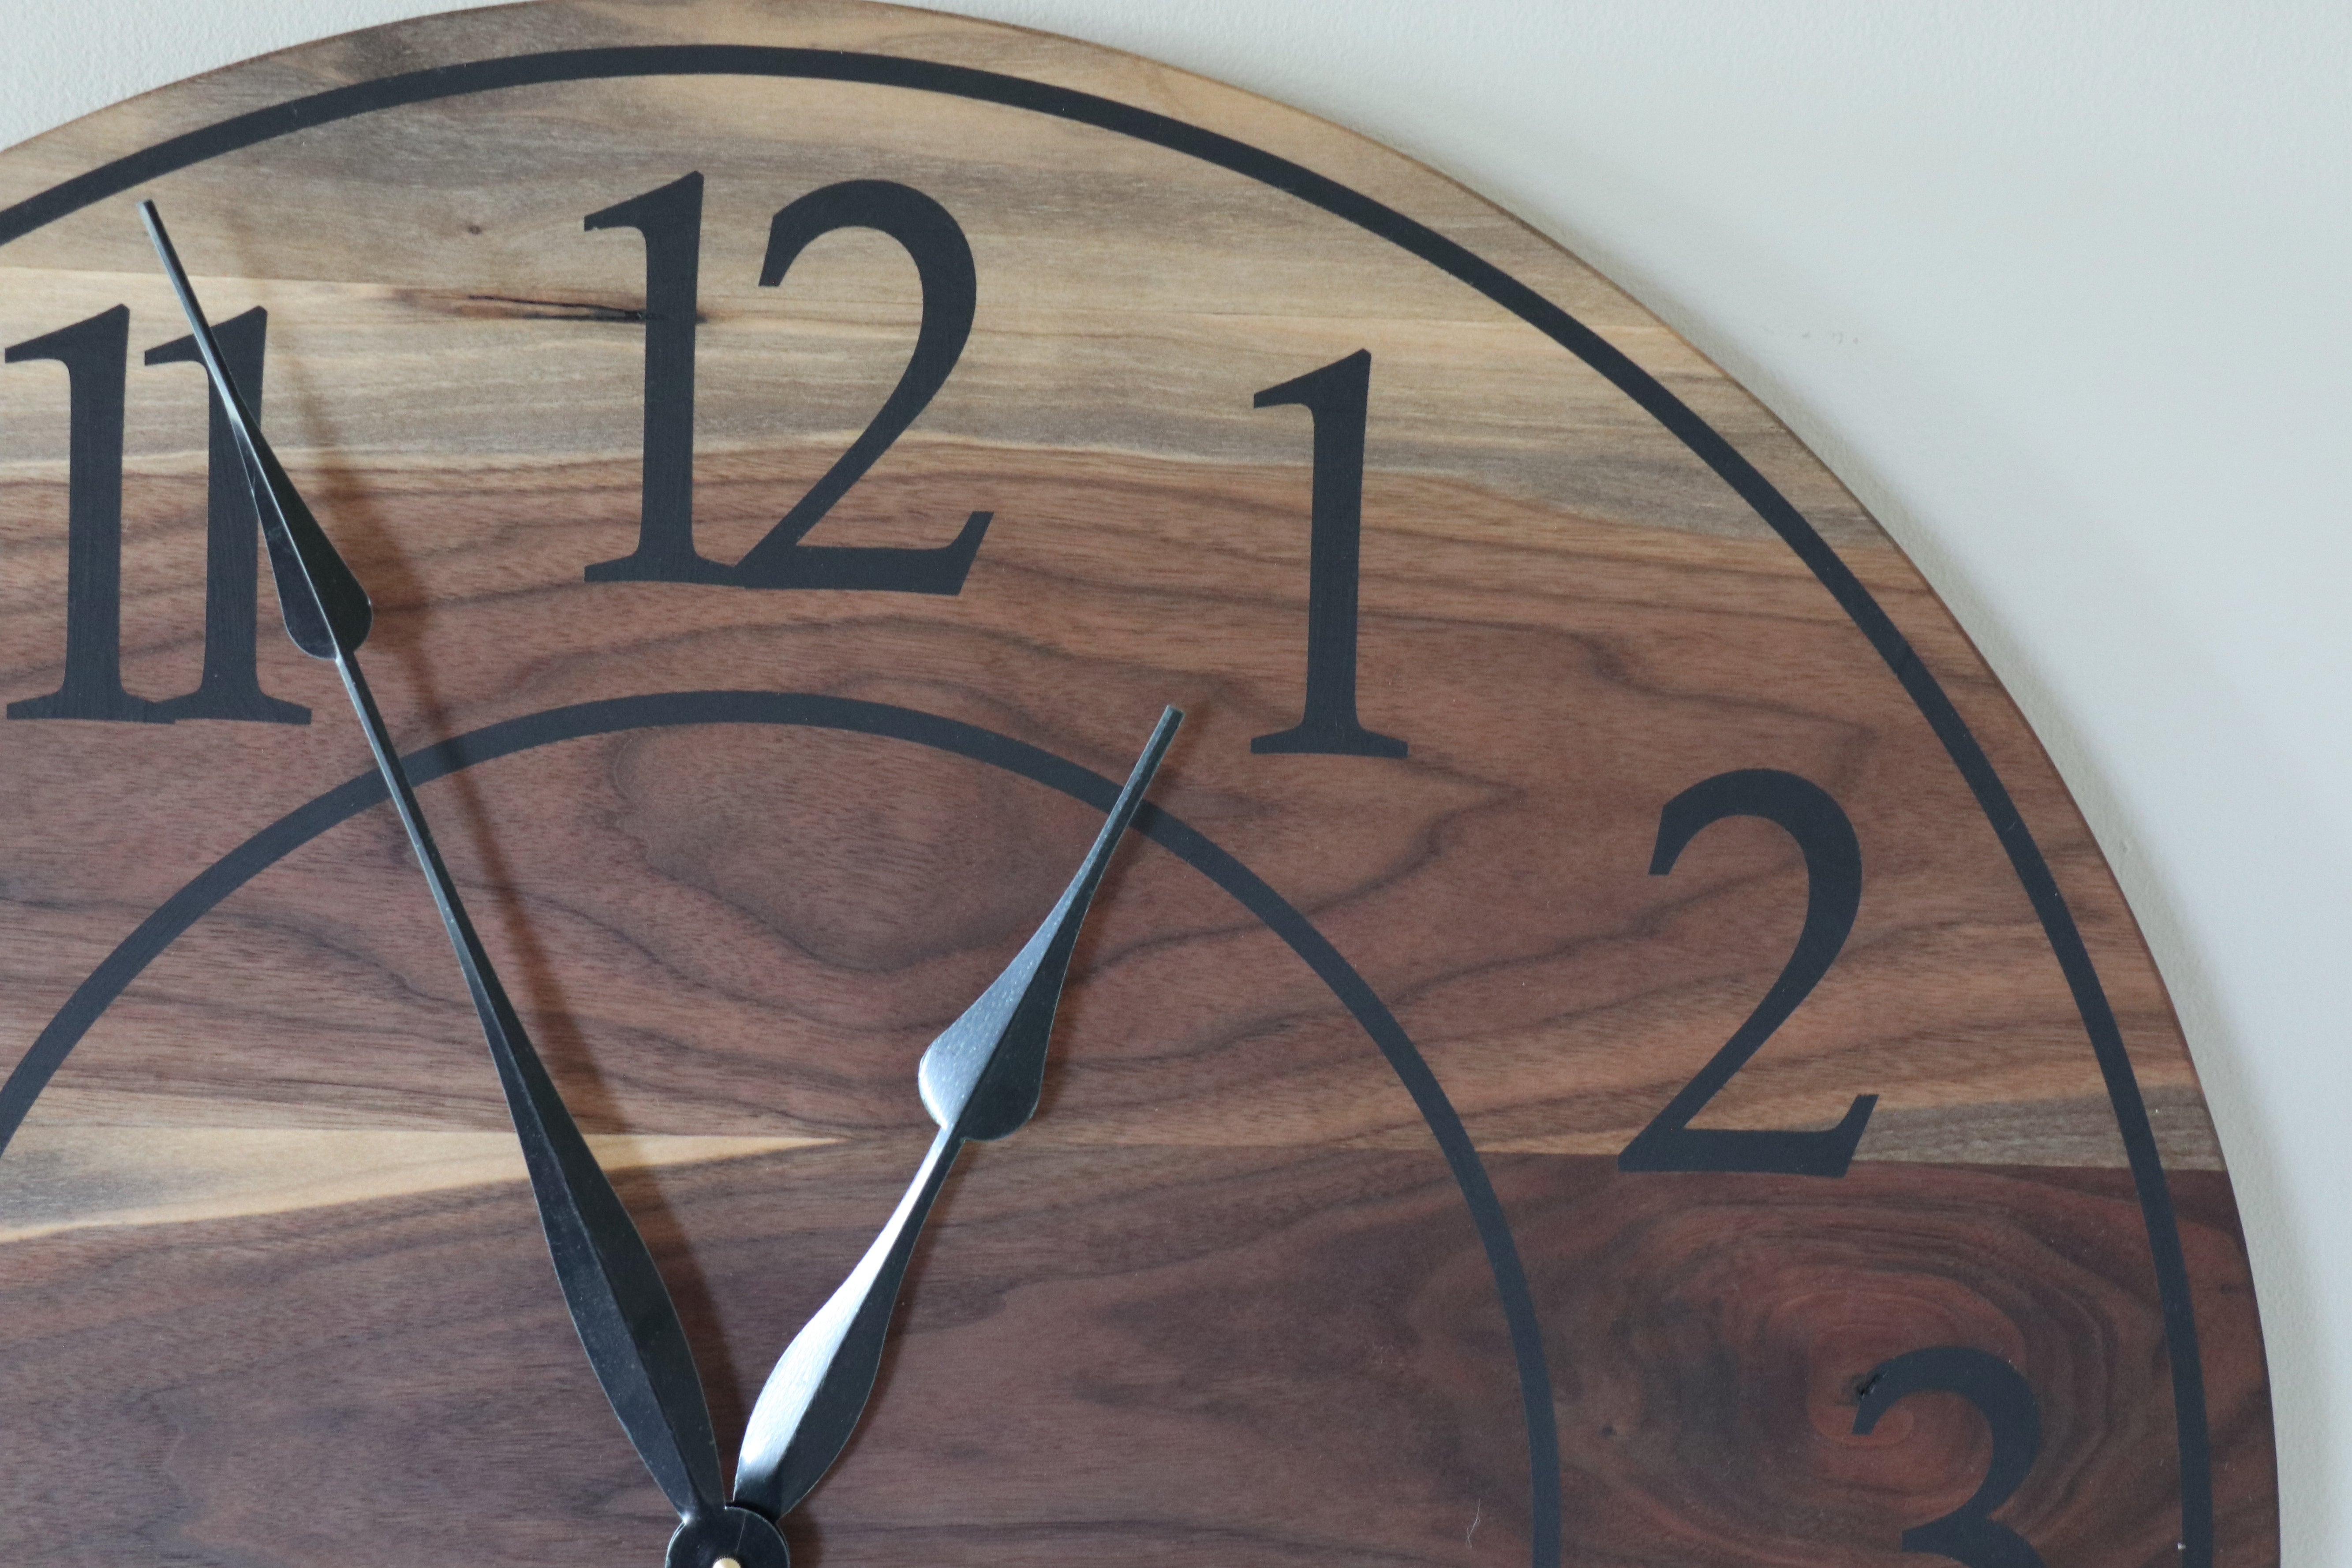 Live Edge 26&quot; Black Walnut Wall Clock with Black Numbers (in stock)